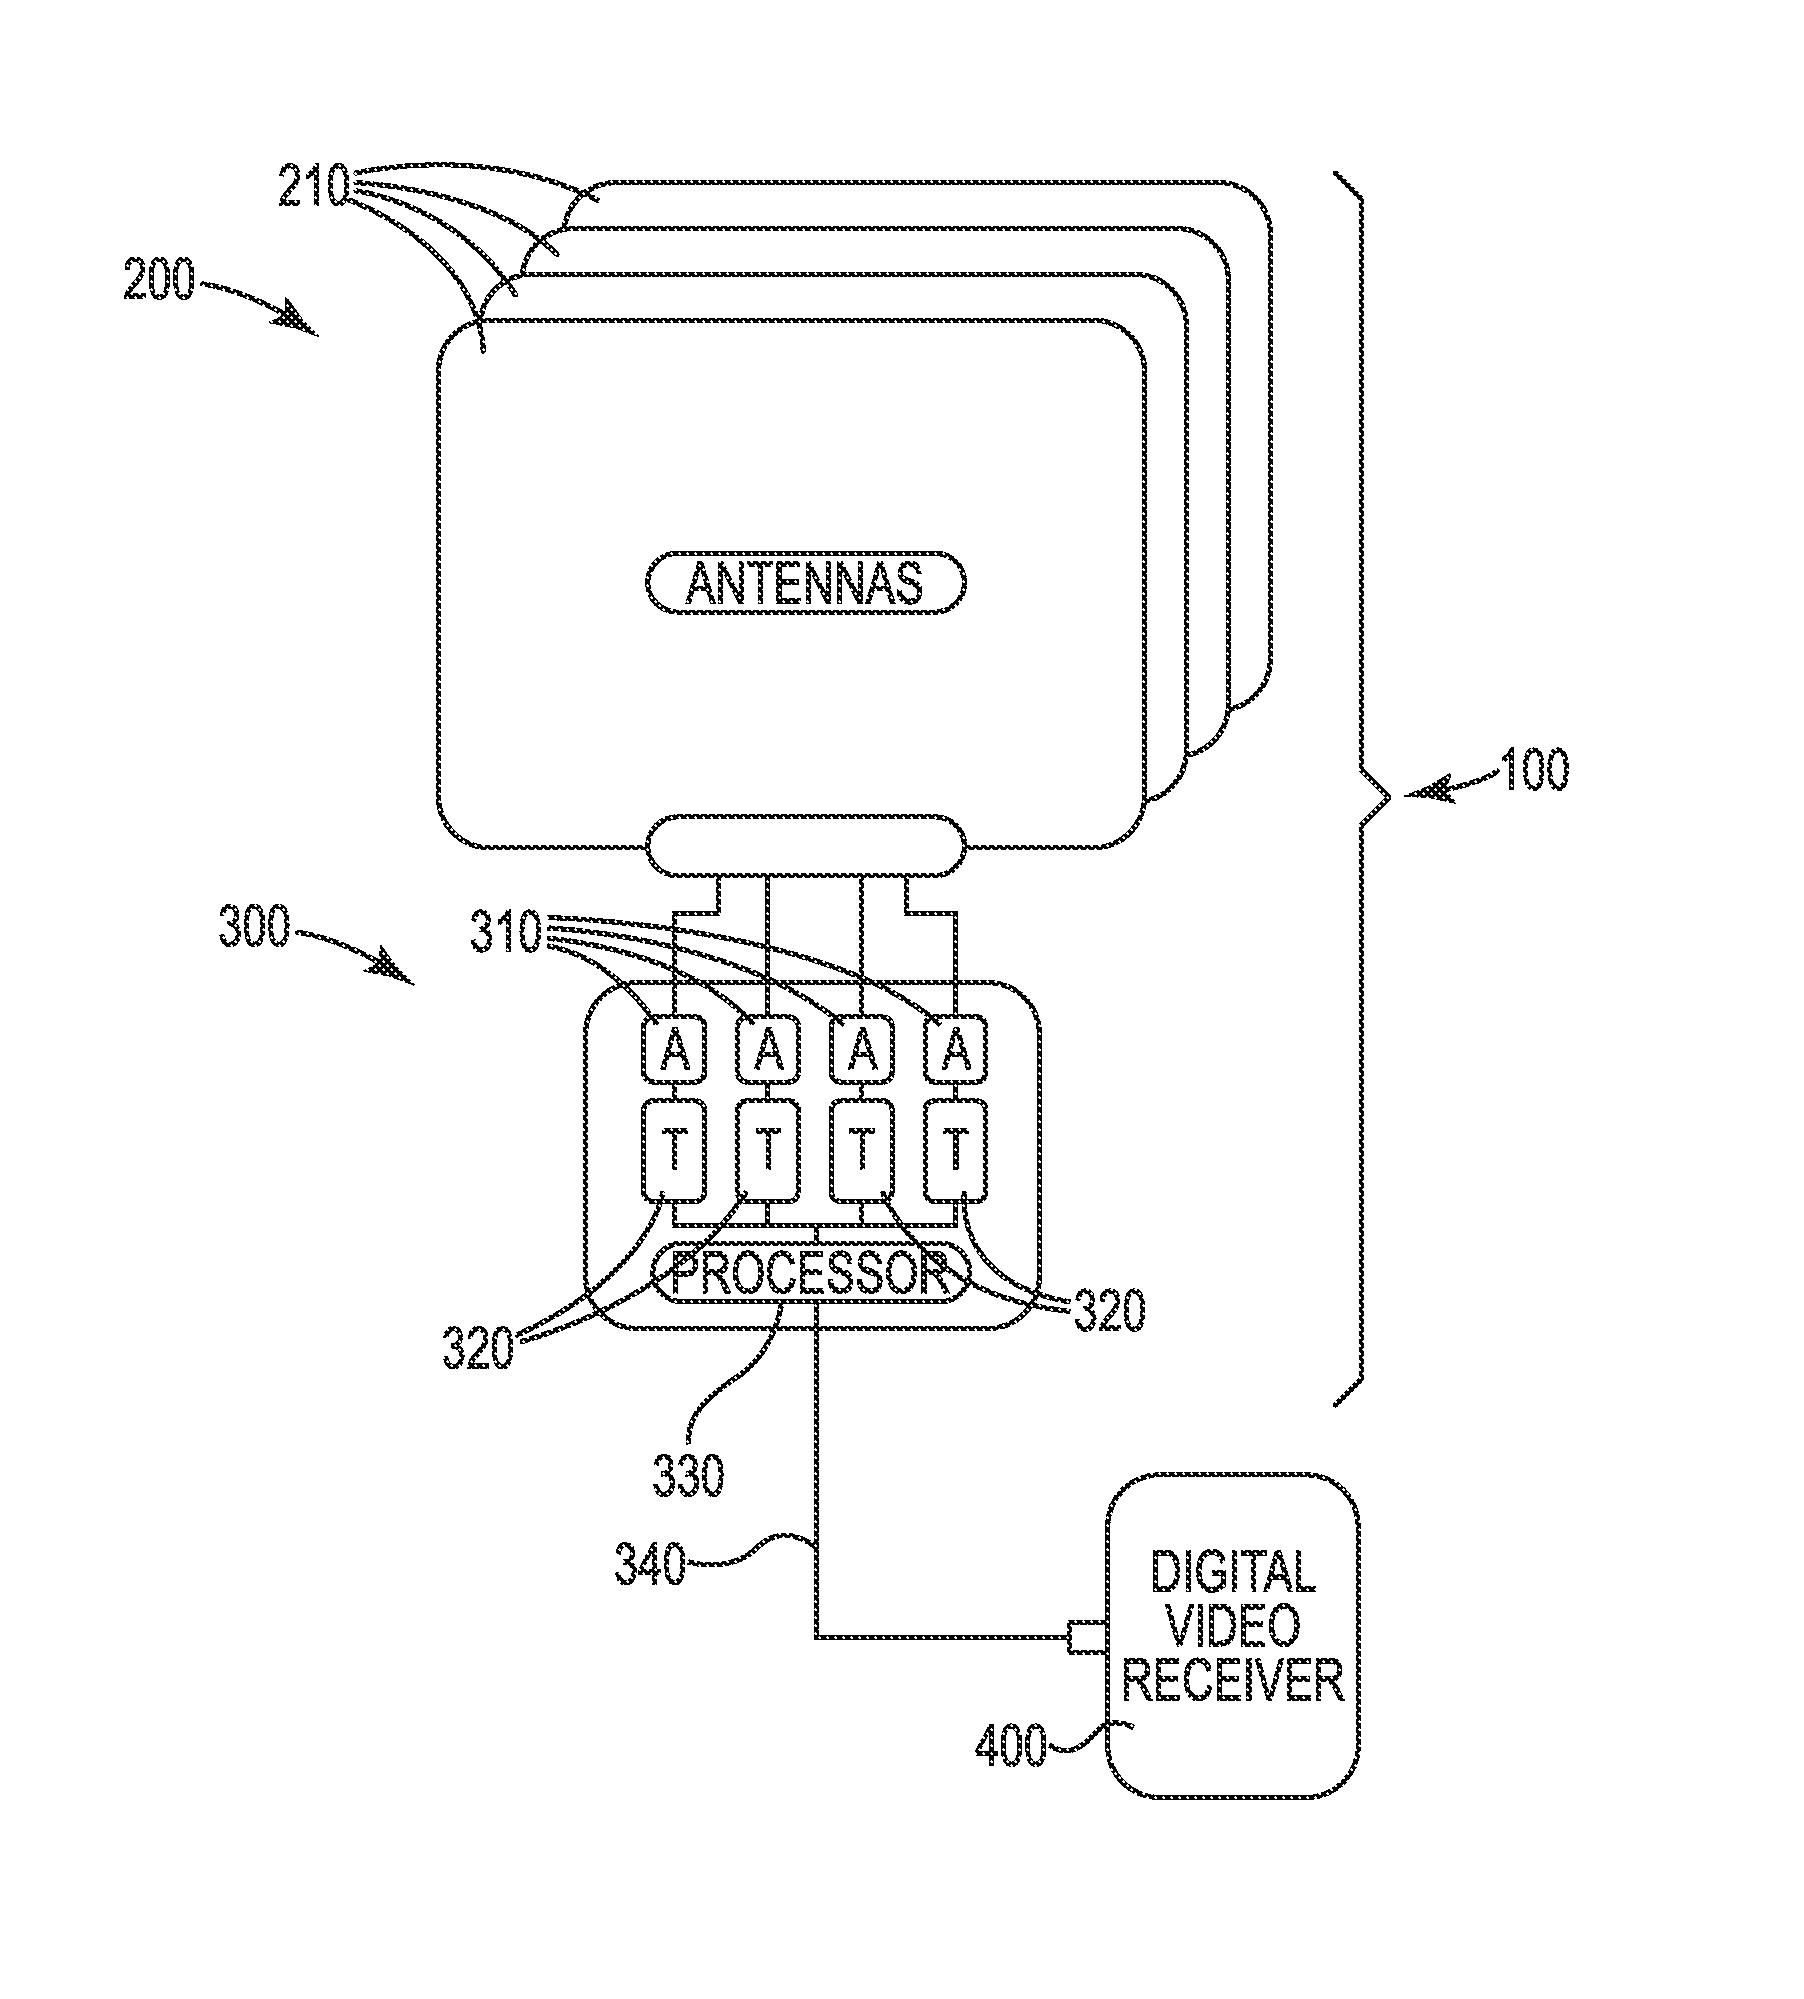 Antenna sub-system for receiving multiple digital broadcast television signals